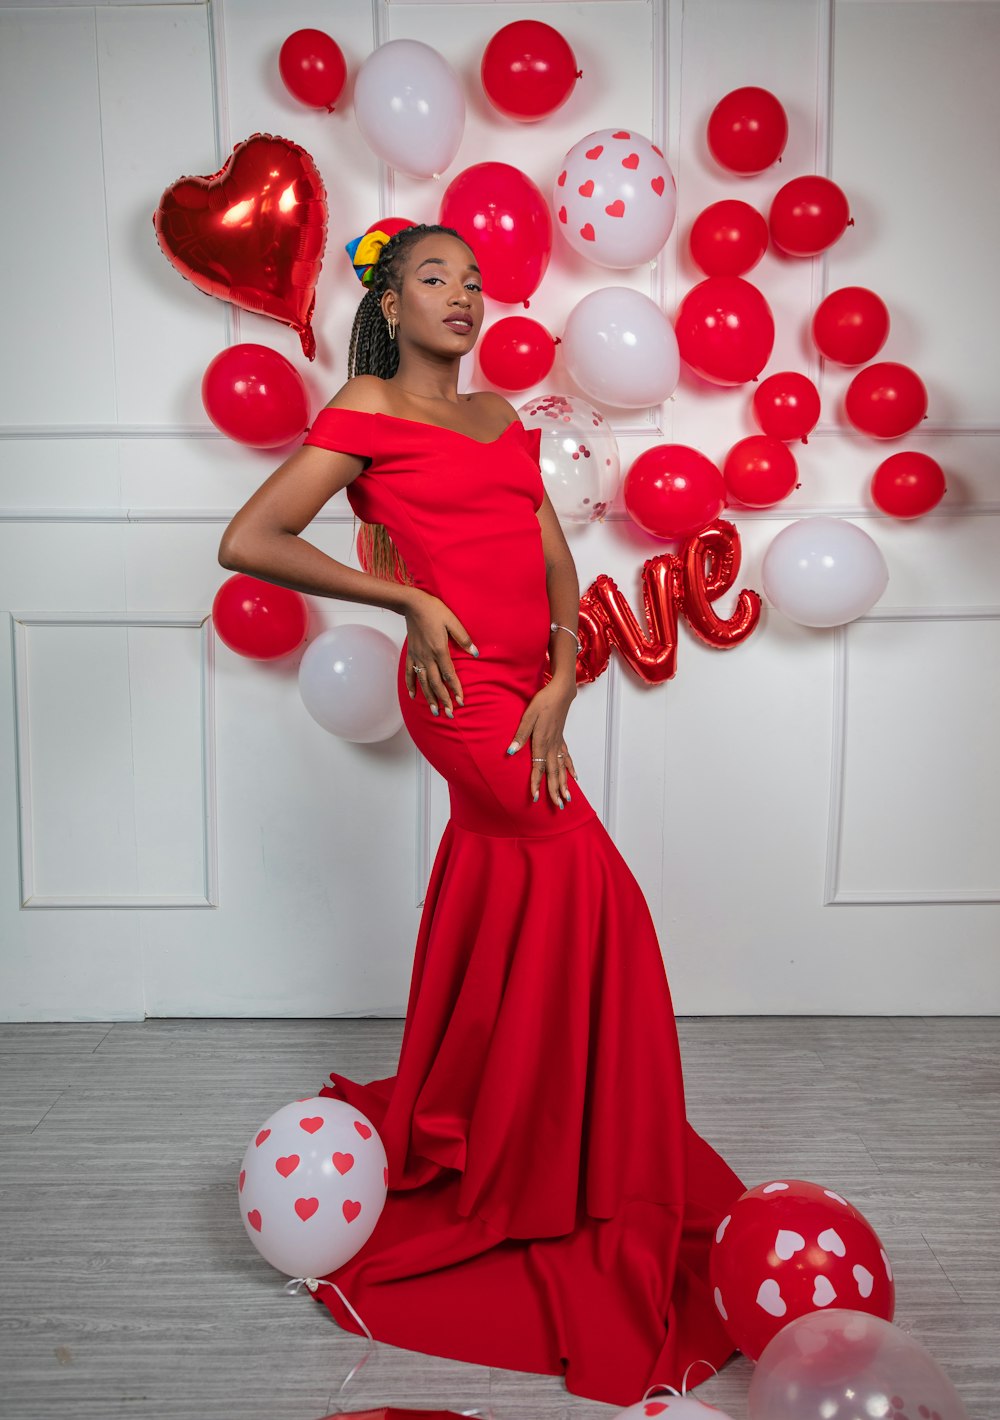 a woman in a red dress standing in front of balloons